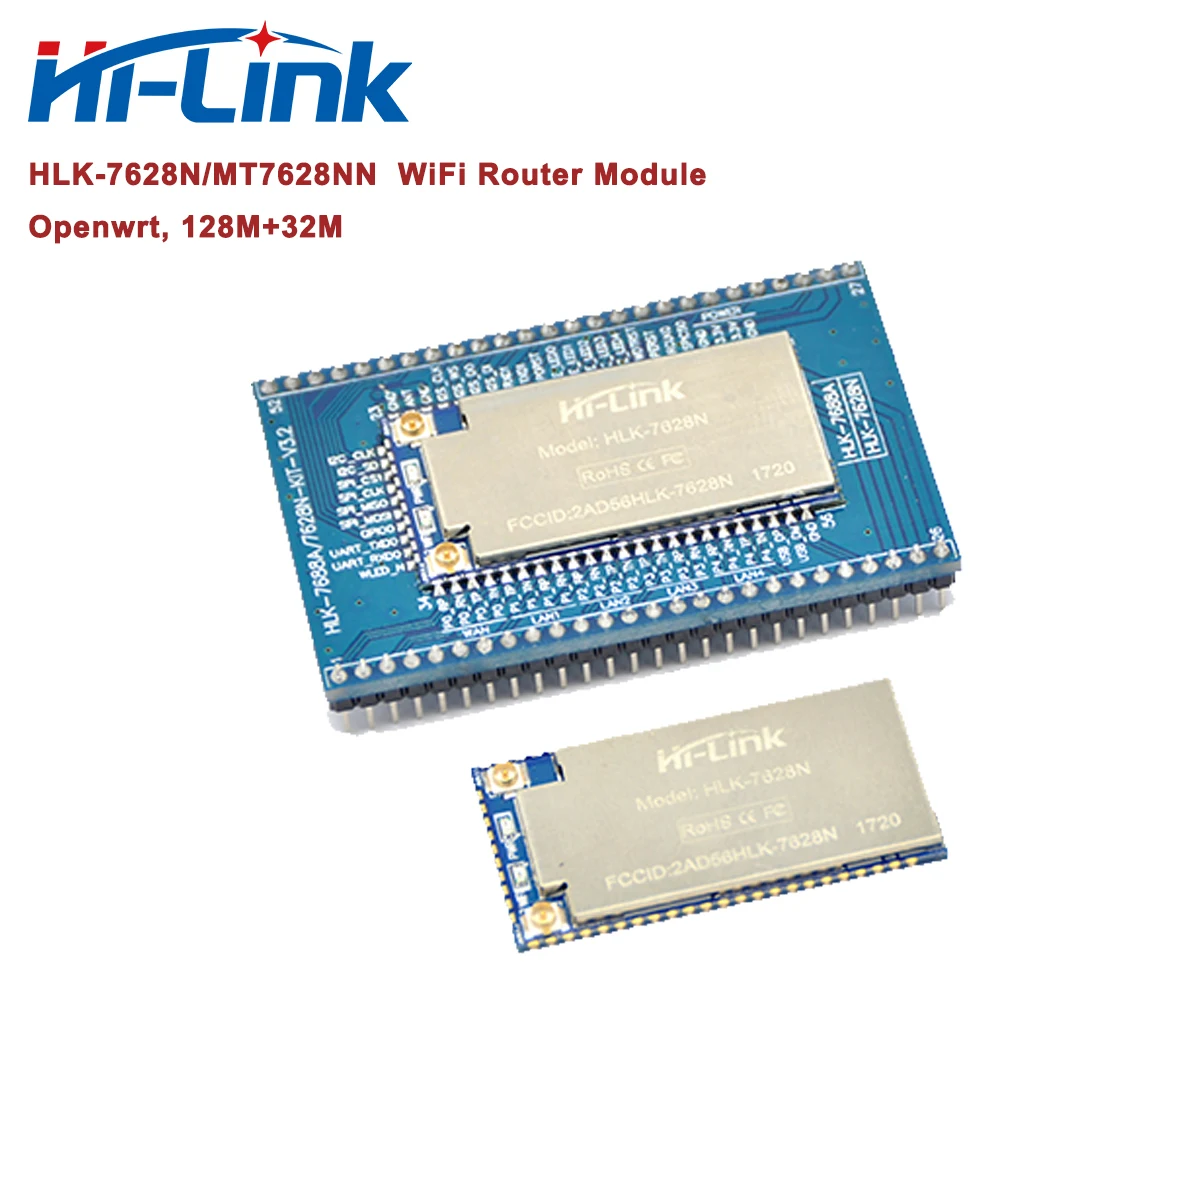 

Free Ship 2pcs Openwrt/Linux MT7628NN WiFi to Ethernet Router Module HLK-7628N with Transfer Board